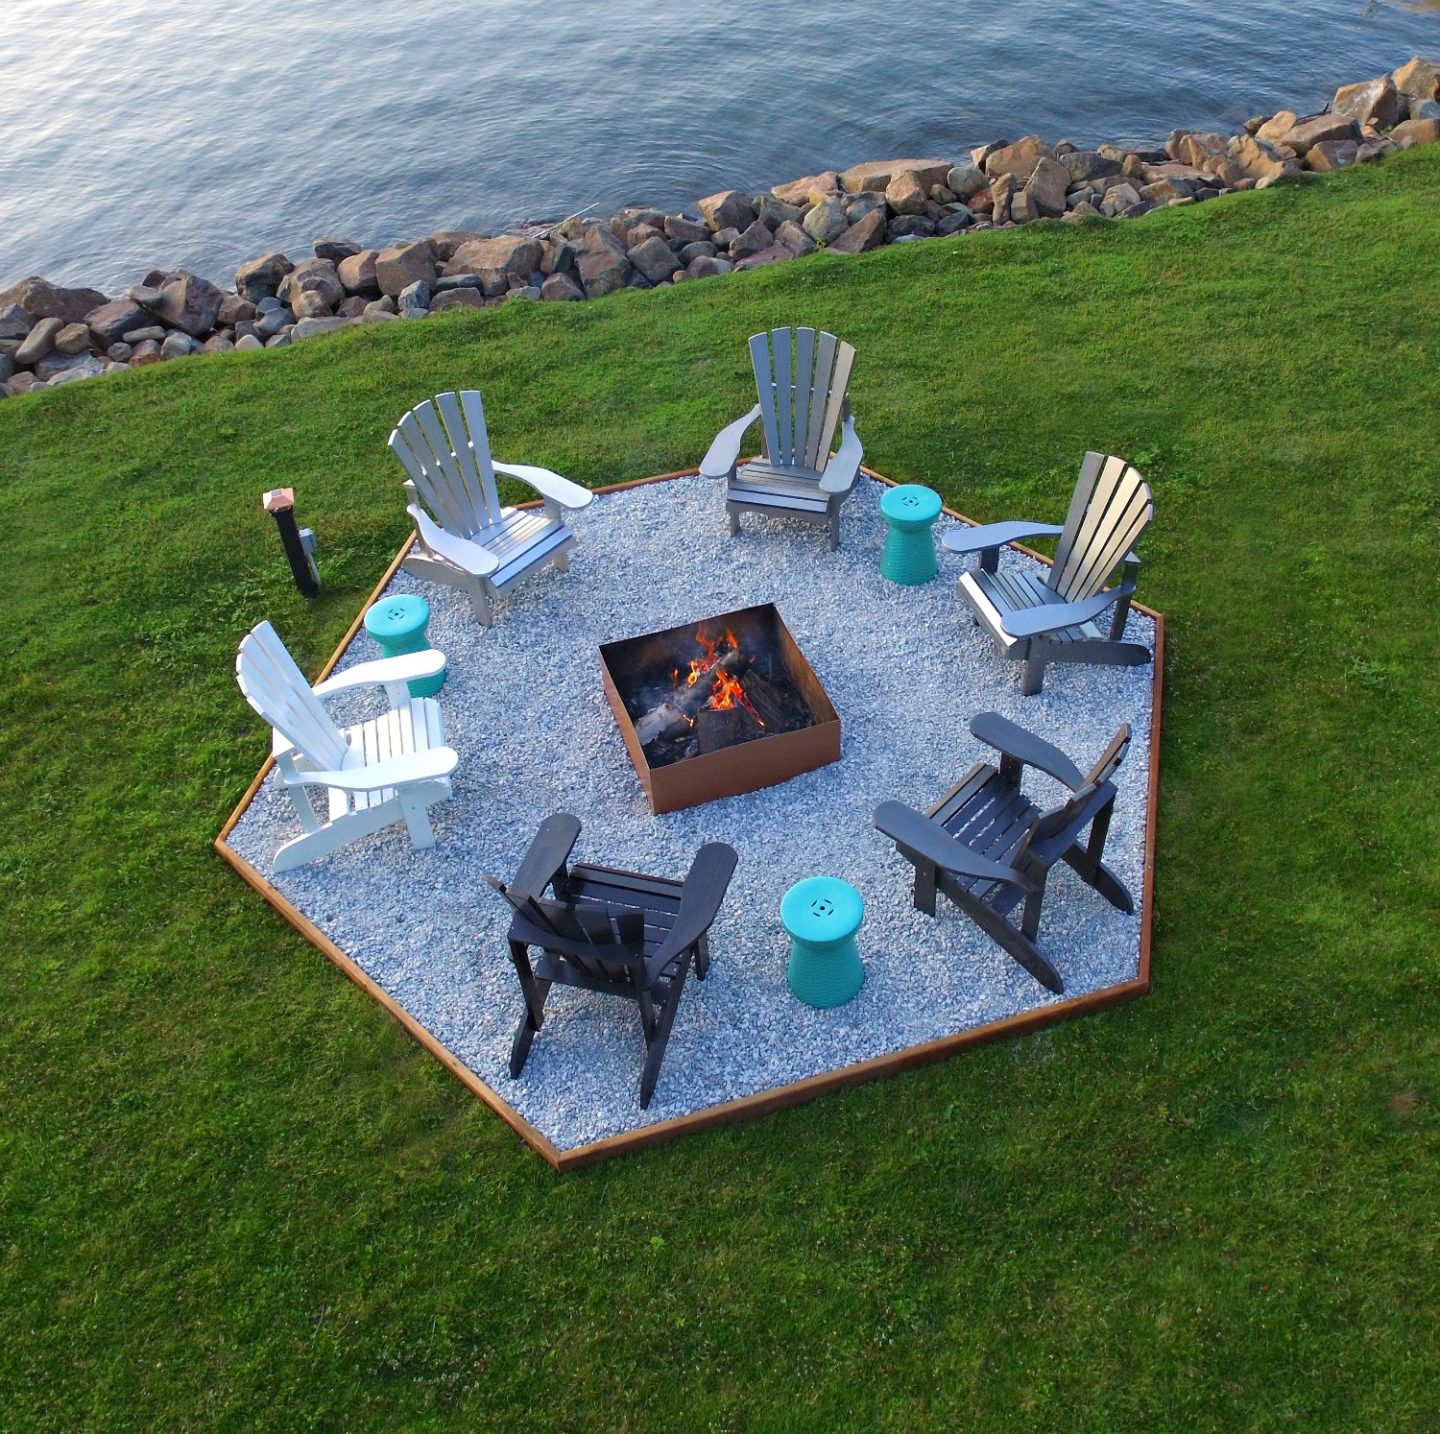 Modern Cottage Fire Pit Makeover + DIY Ombre Adirondack Chairs (Sponsored by The Home Depot Canada)